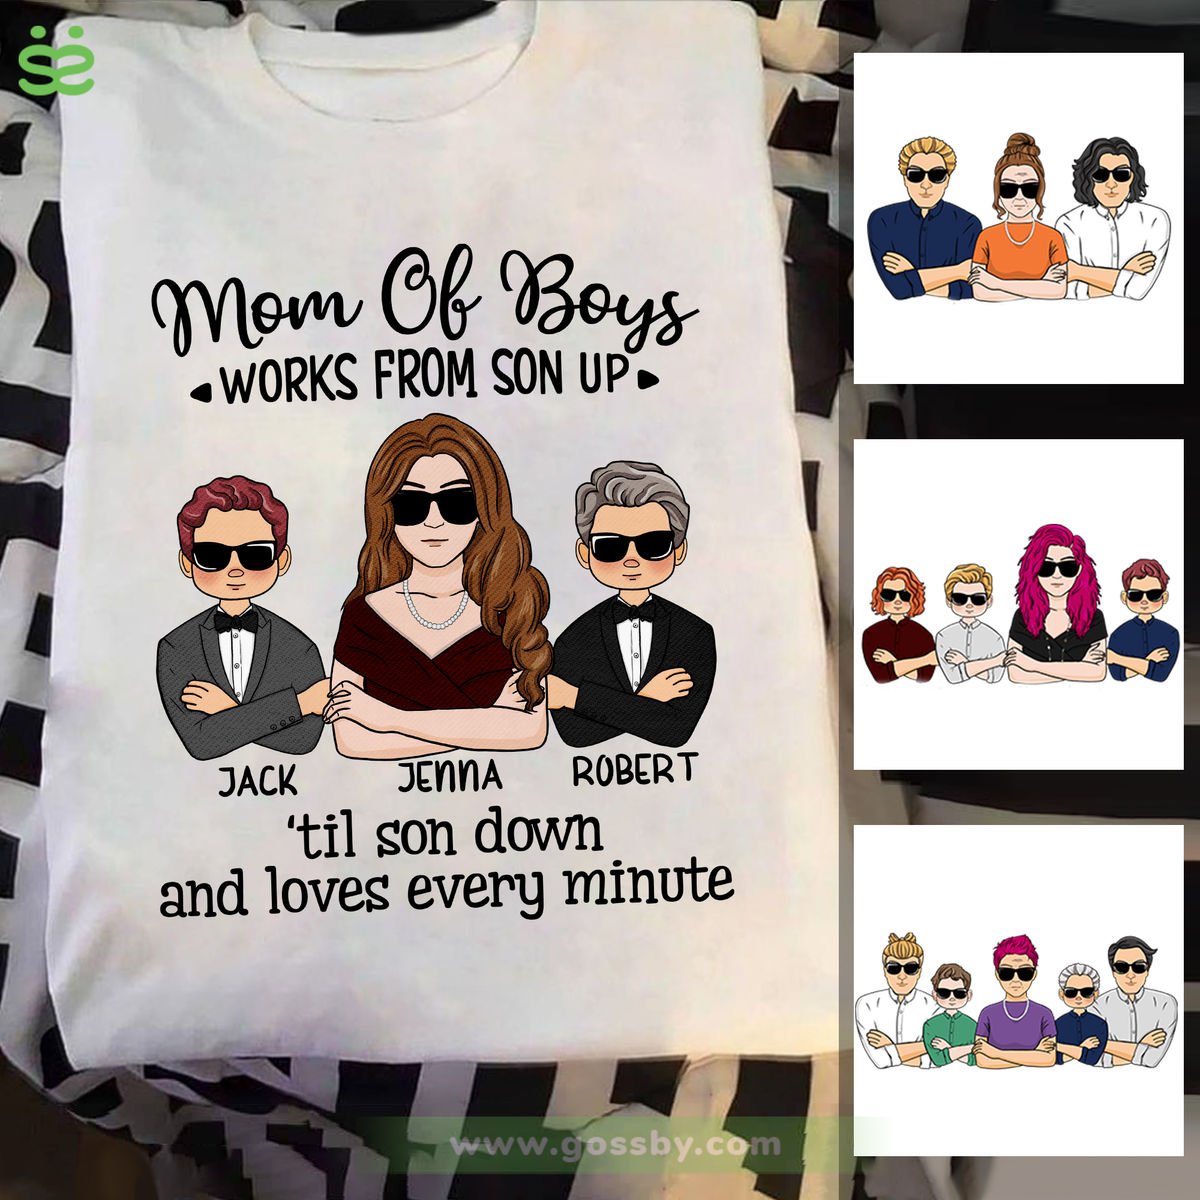 Personalized Shirt - Family - Mom & Son - Mom of boys Works from son up  'til son down and loves every minute (6450)_1